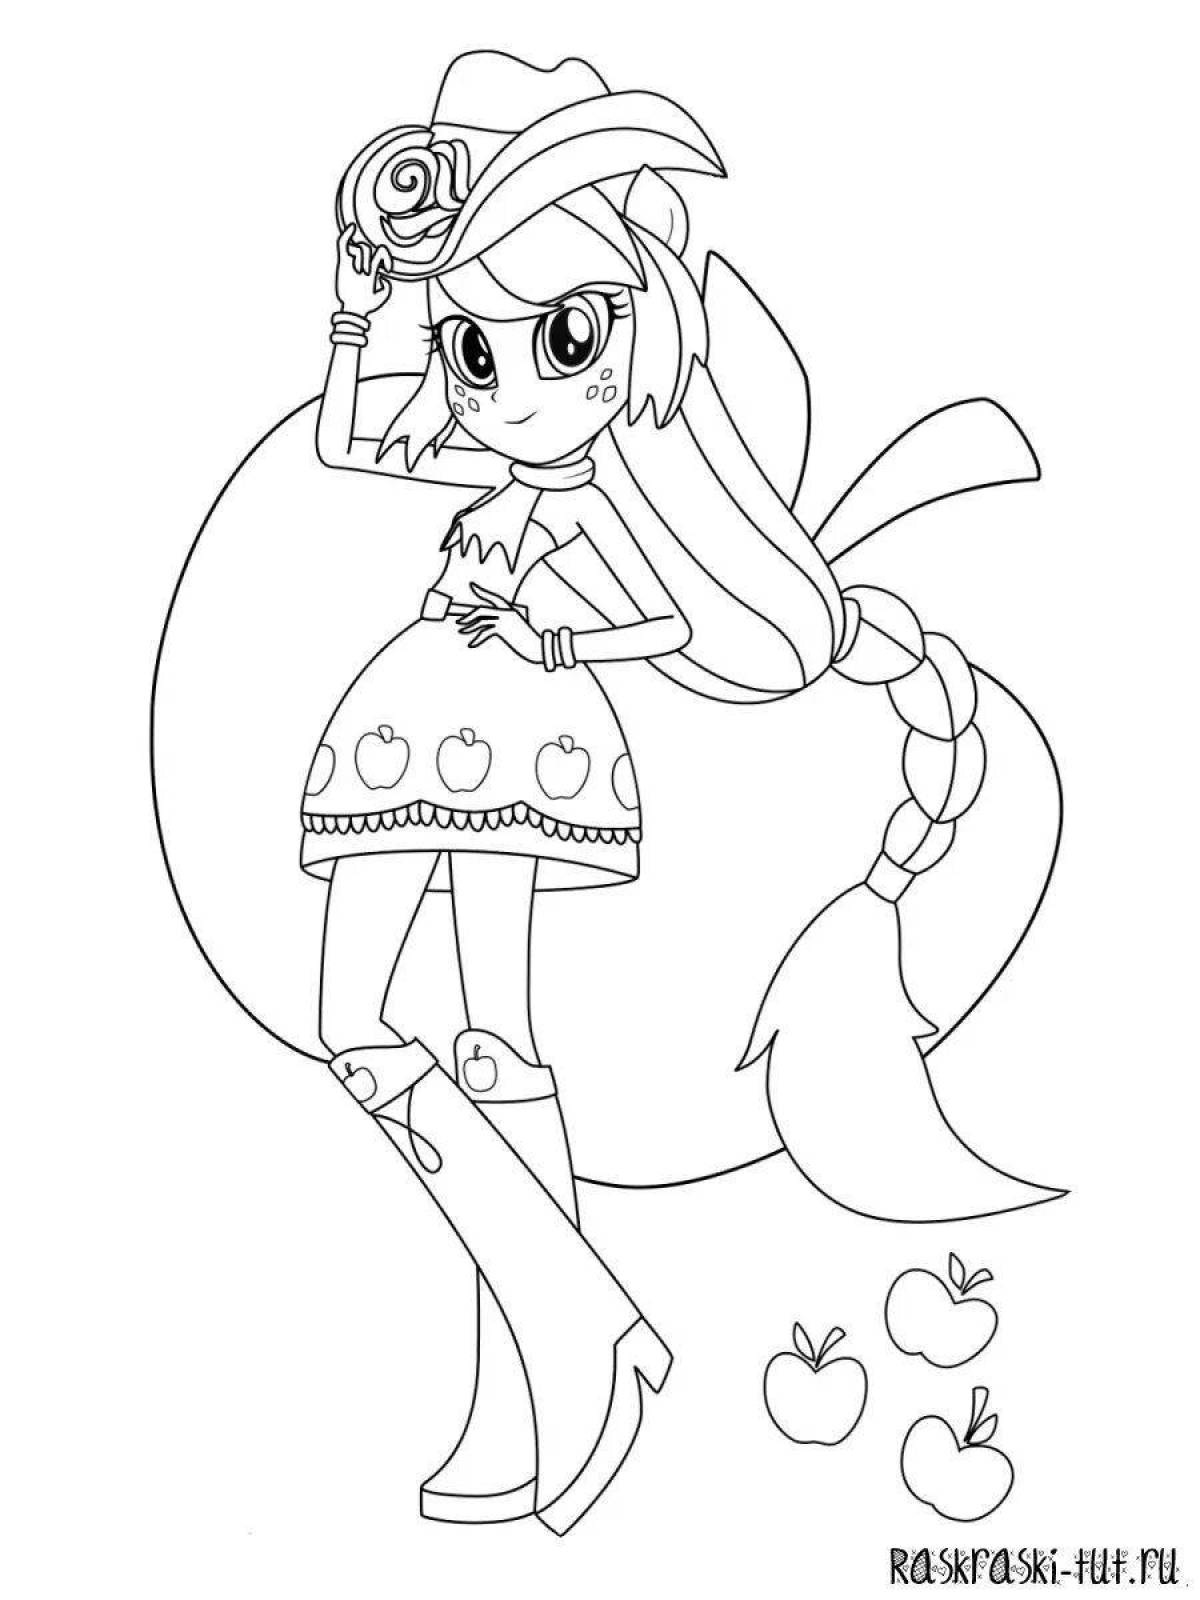 Coloring page adorable pony doll